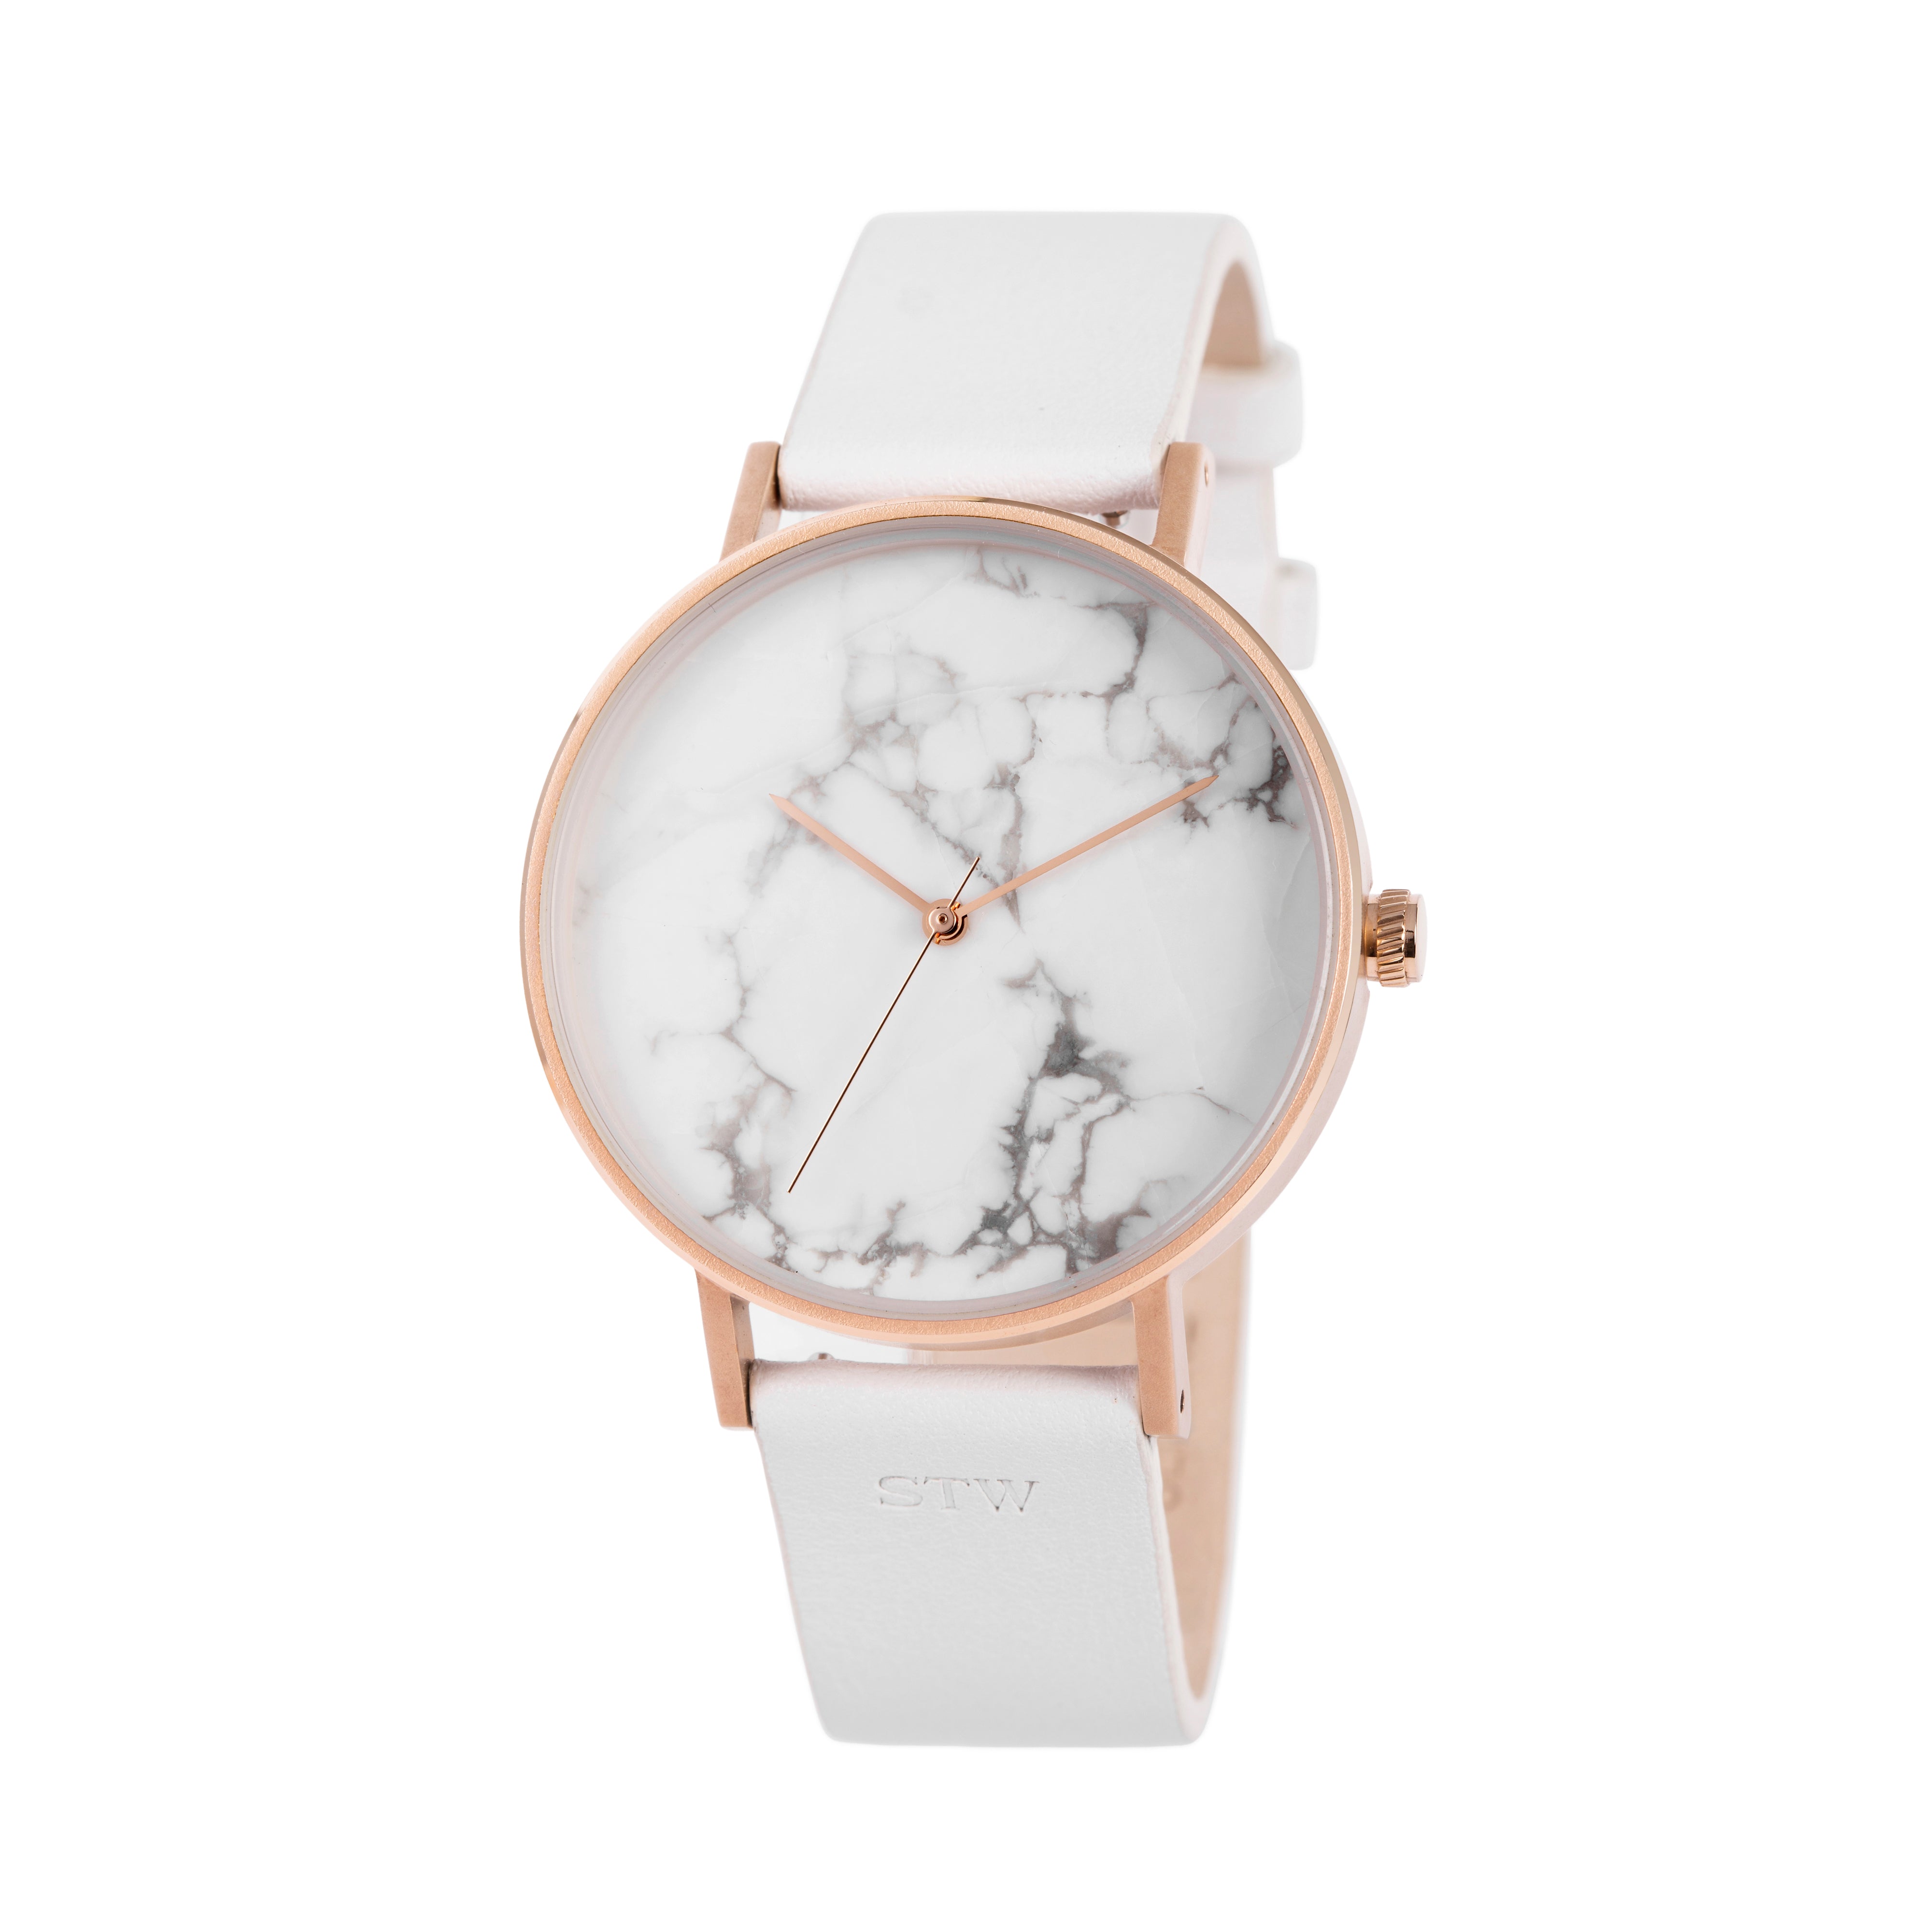 THE STONE -  WHITE MARBLE DIAL WITH WHITE LEATHER STRAP WATCH